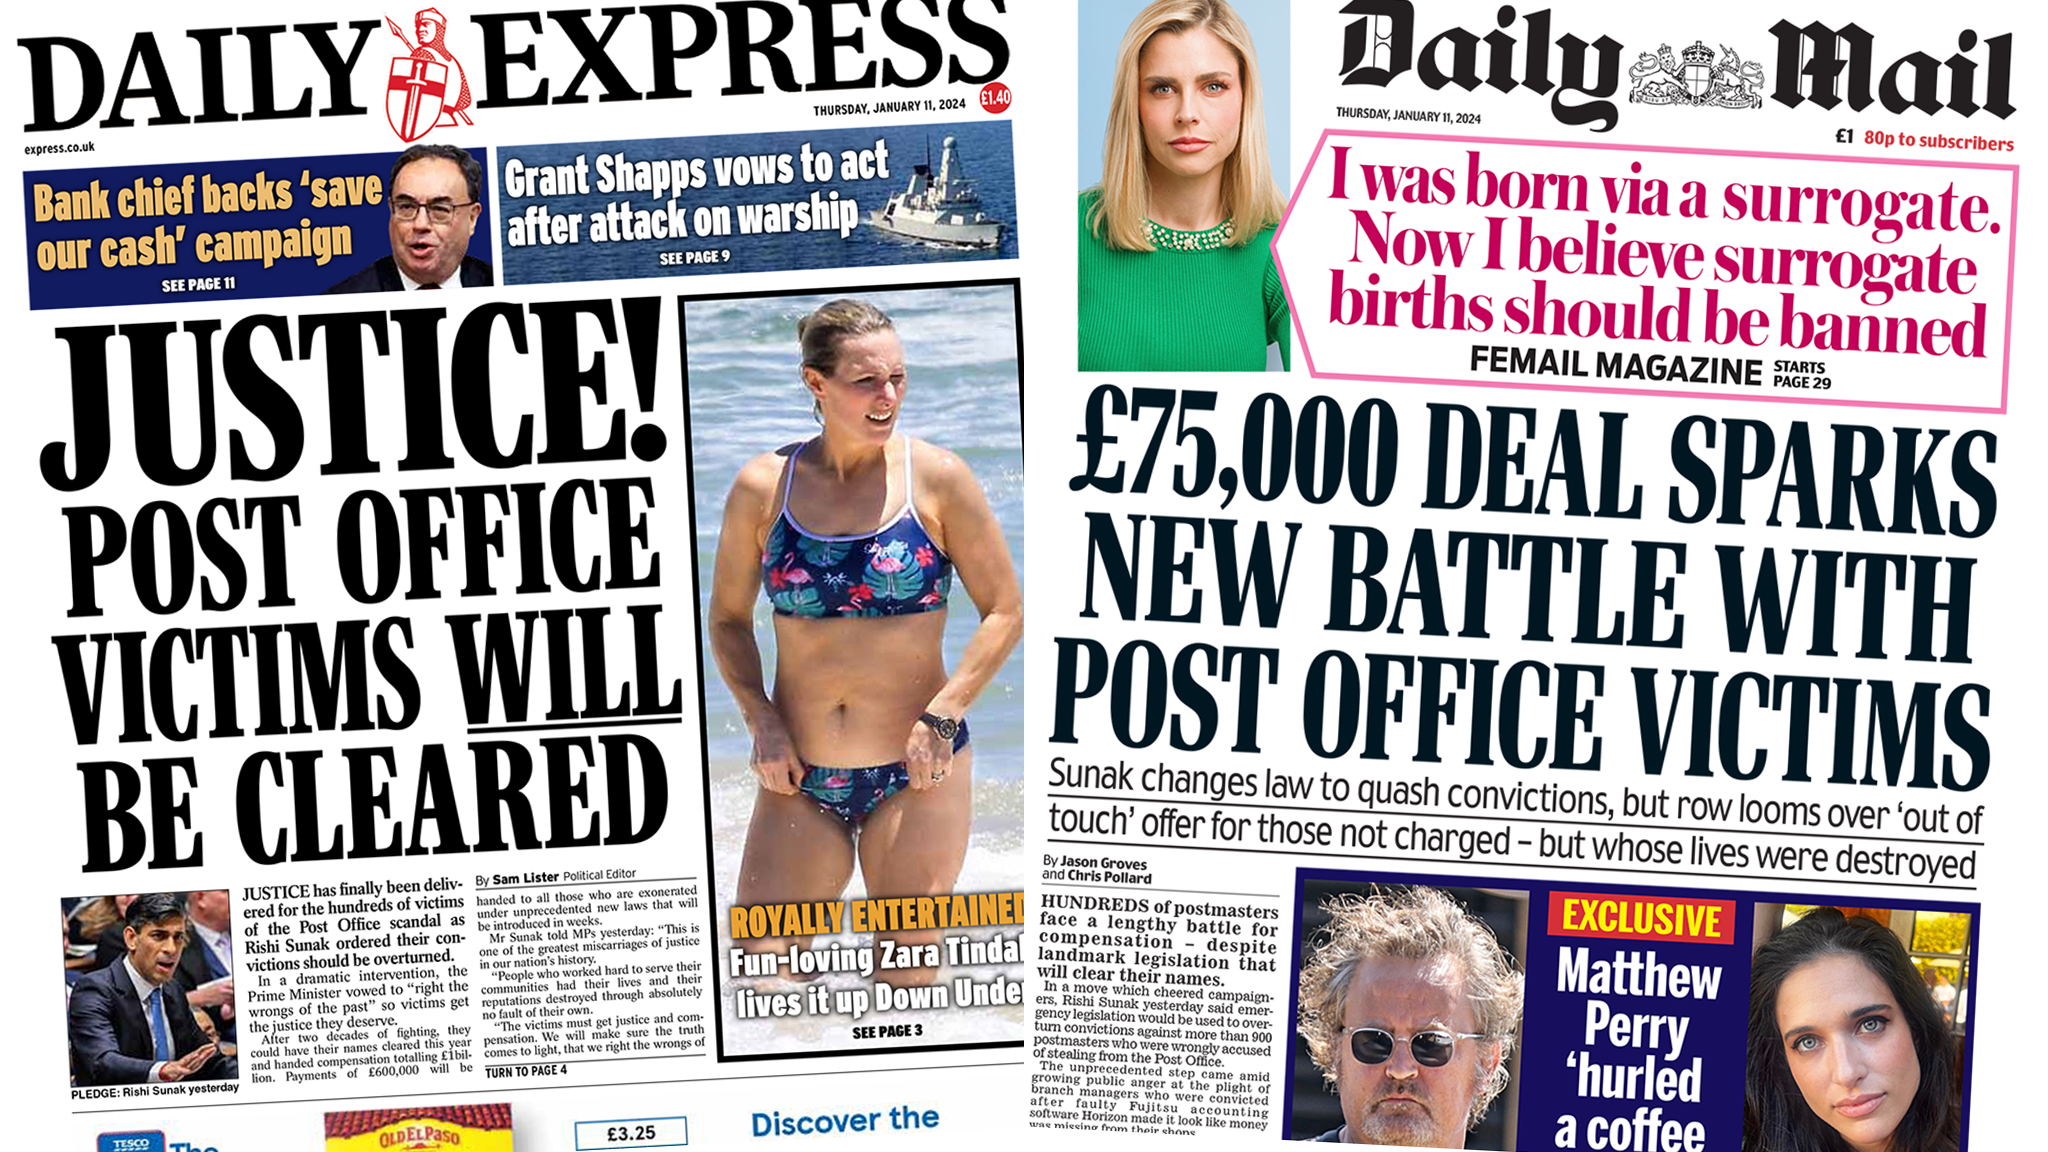 The headline in the Express reads, "Justice! Post Office victims will be cleared", while the headline in the Mail reads, "£75,000 deal sparks new battle with Post Office victims".